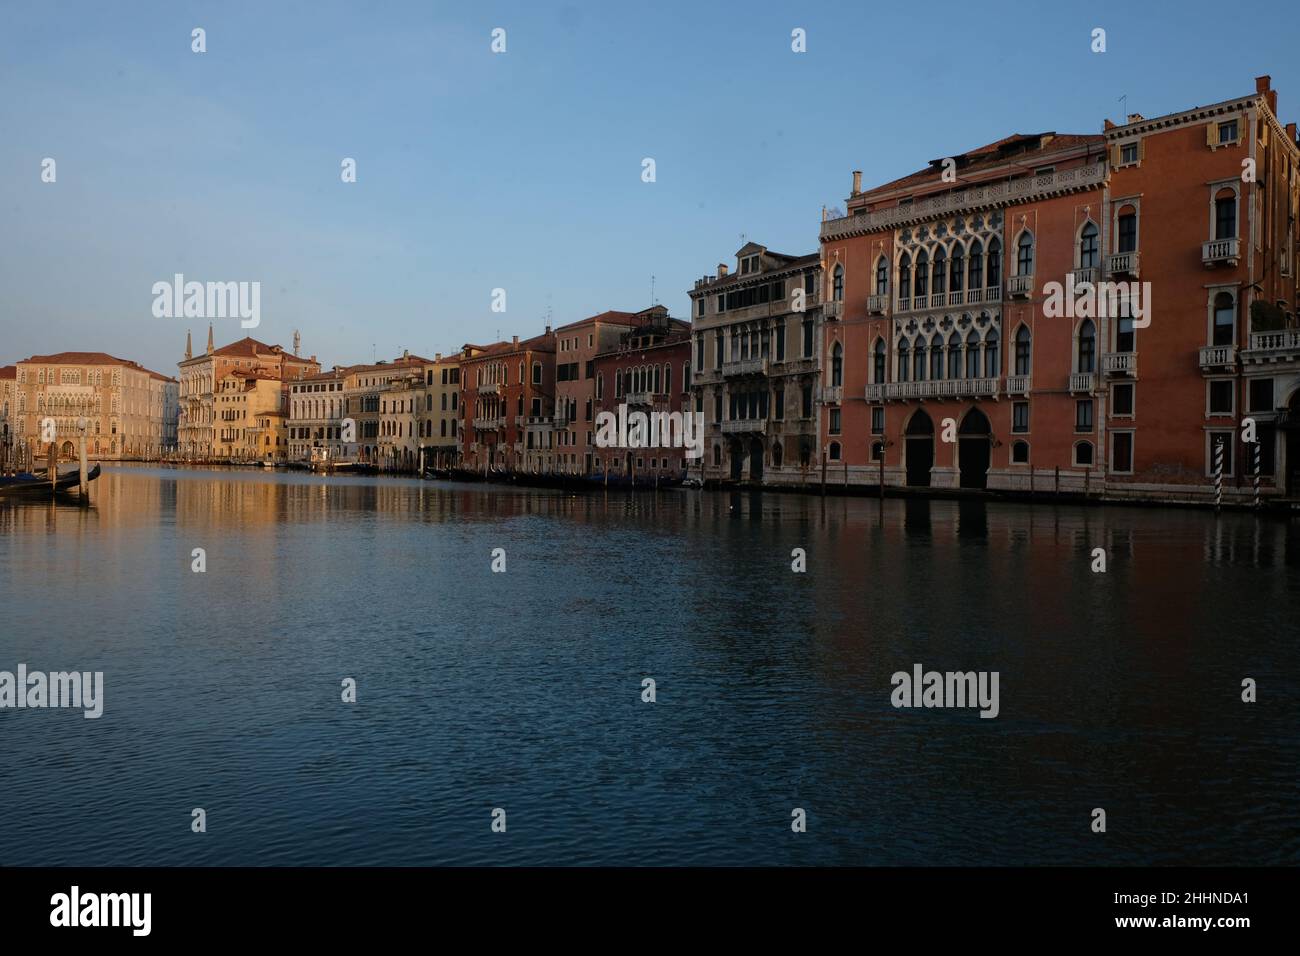 A general view of the Grand Canal in Venice Stock Photo